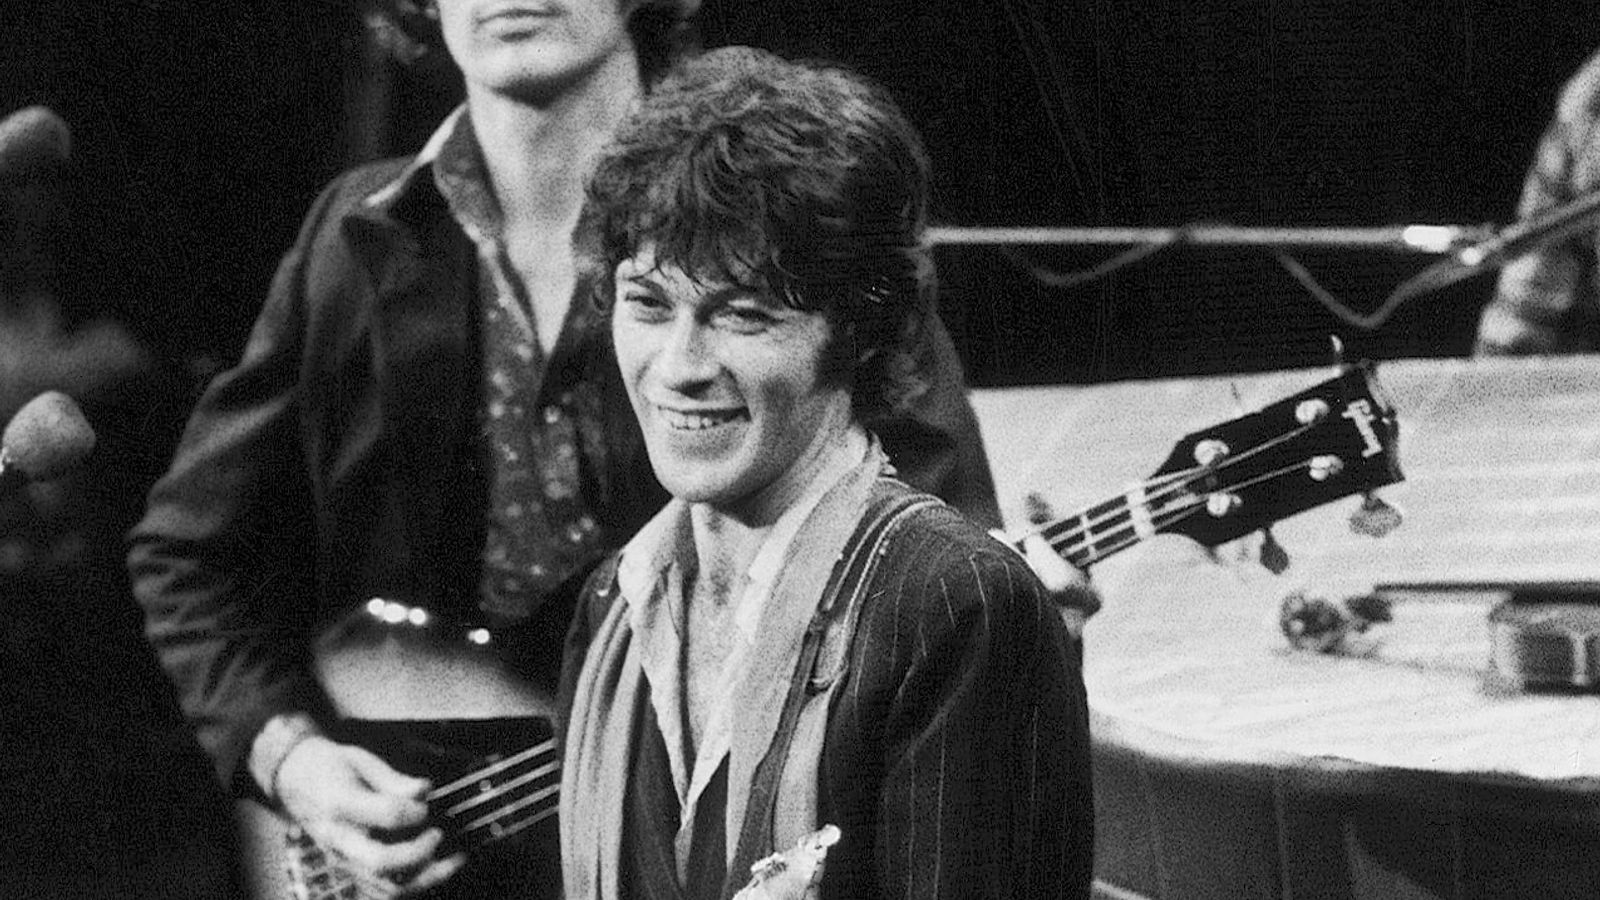 Robbie Robertson, lead guitarist and songwriter of The Band, dies aged 80